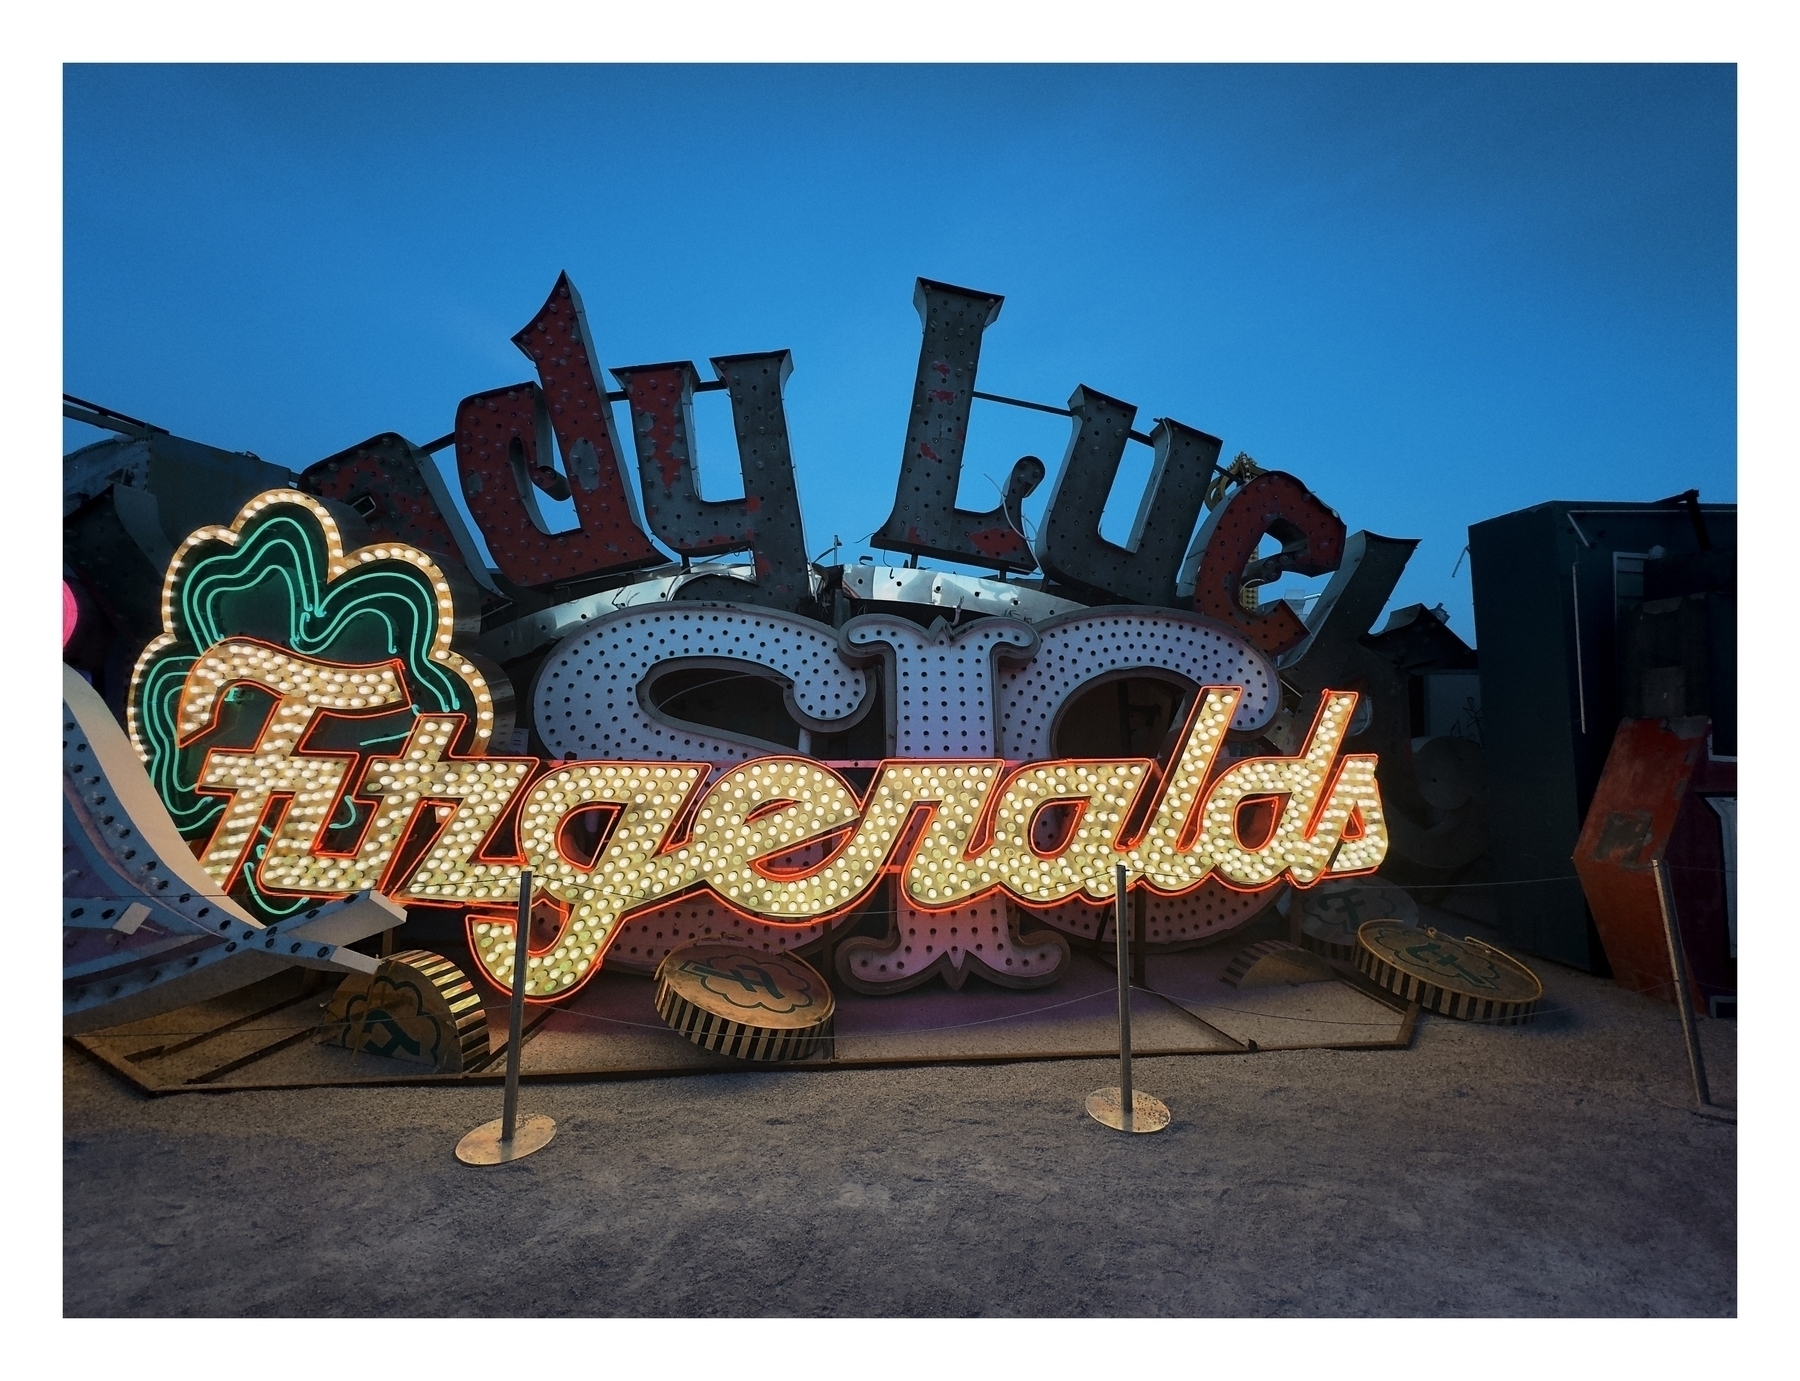 Vintage neon signs reading “Lady Luck” and “Fitzgeralds” stand against a twilight sky, implying a retro or decommissioned setting.